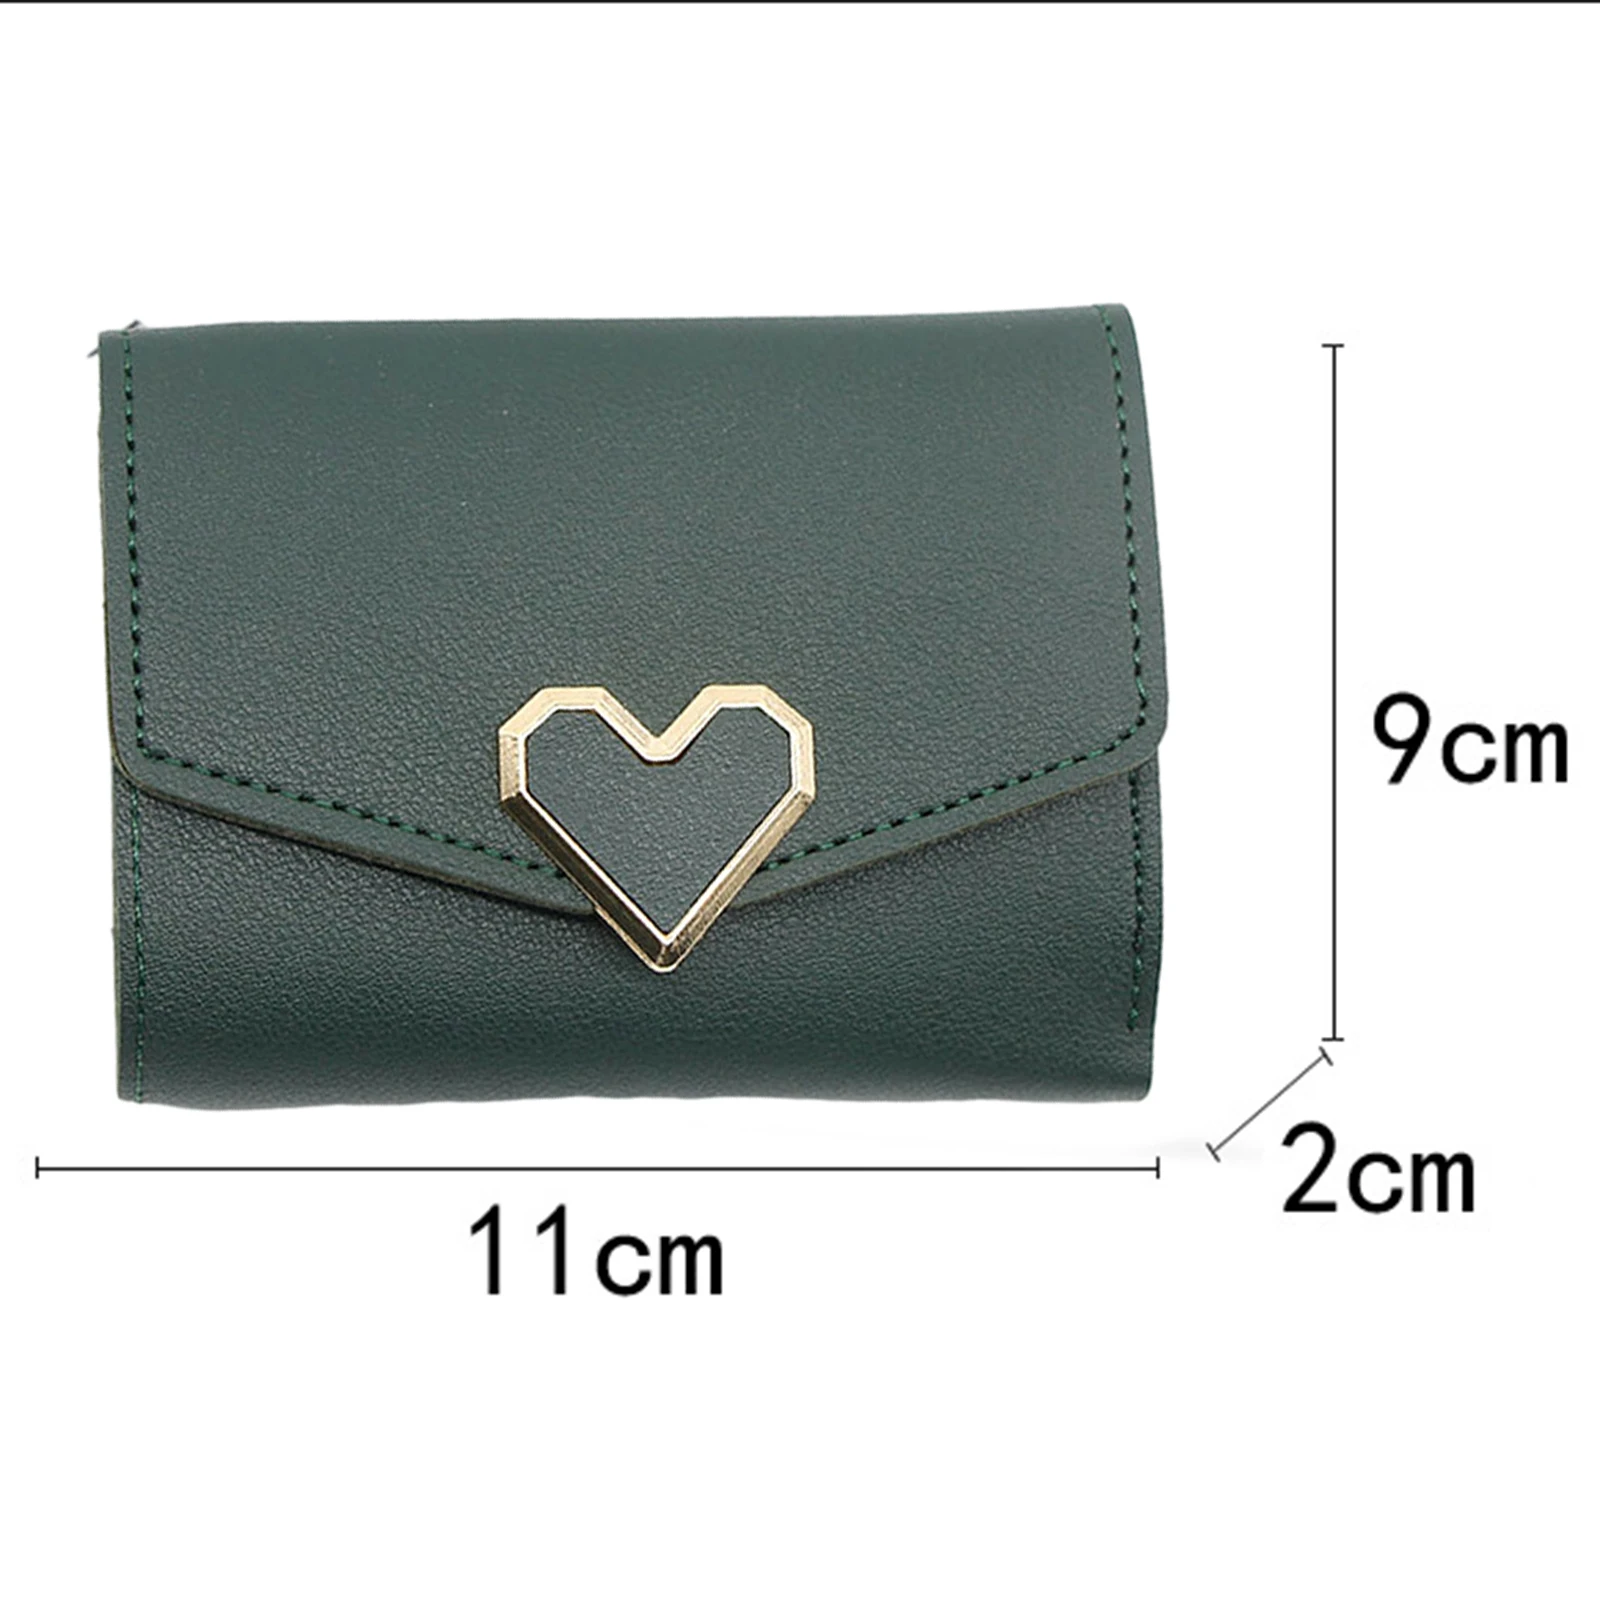 Women's Coin Purse Ladies Compact Leather Foldable Short Wallet Clutch Bag